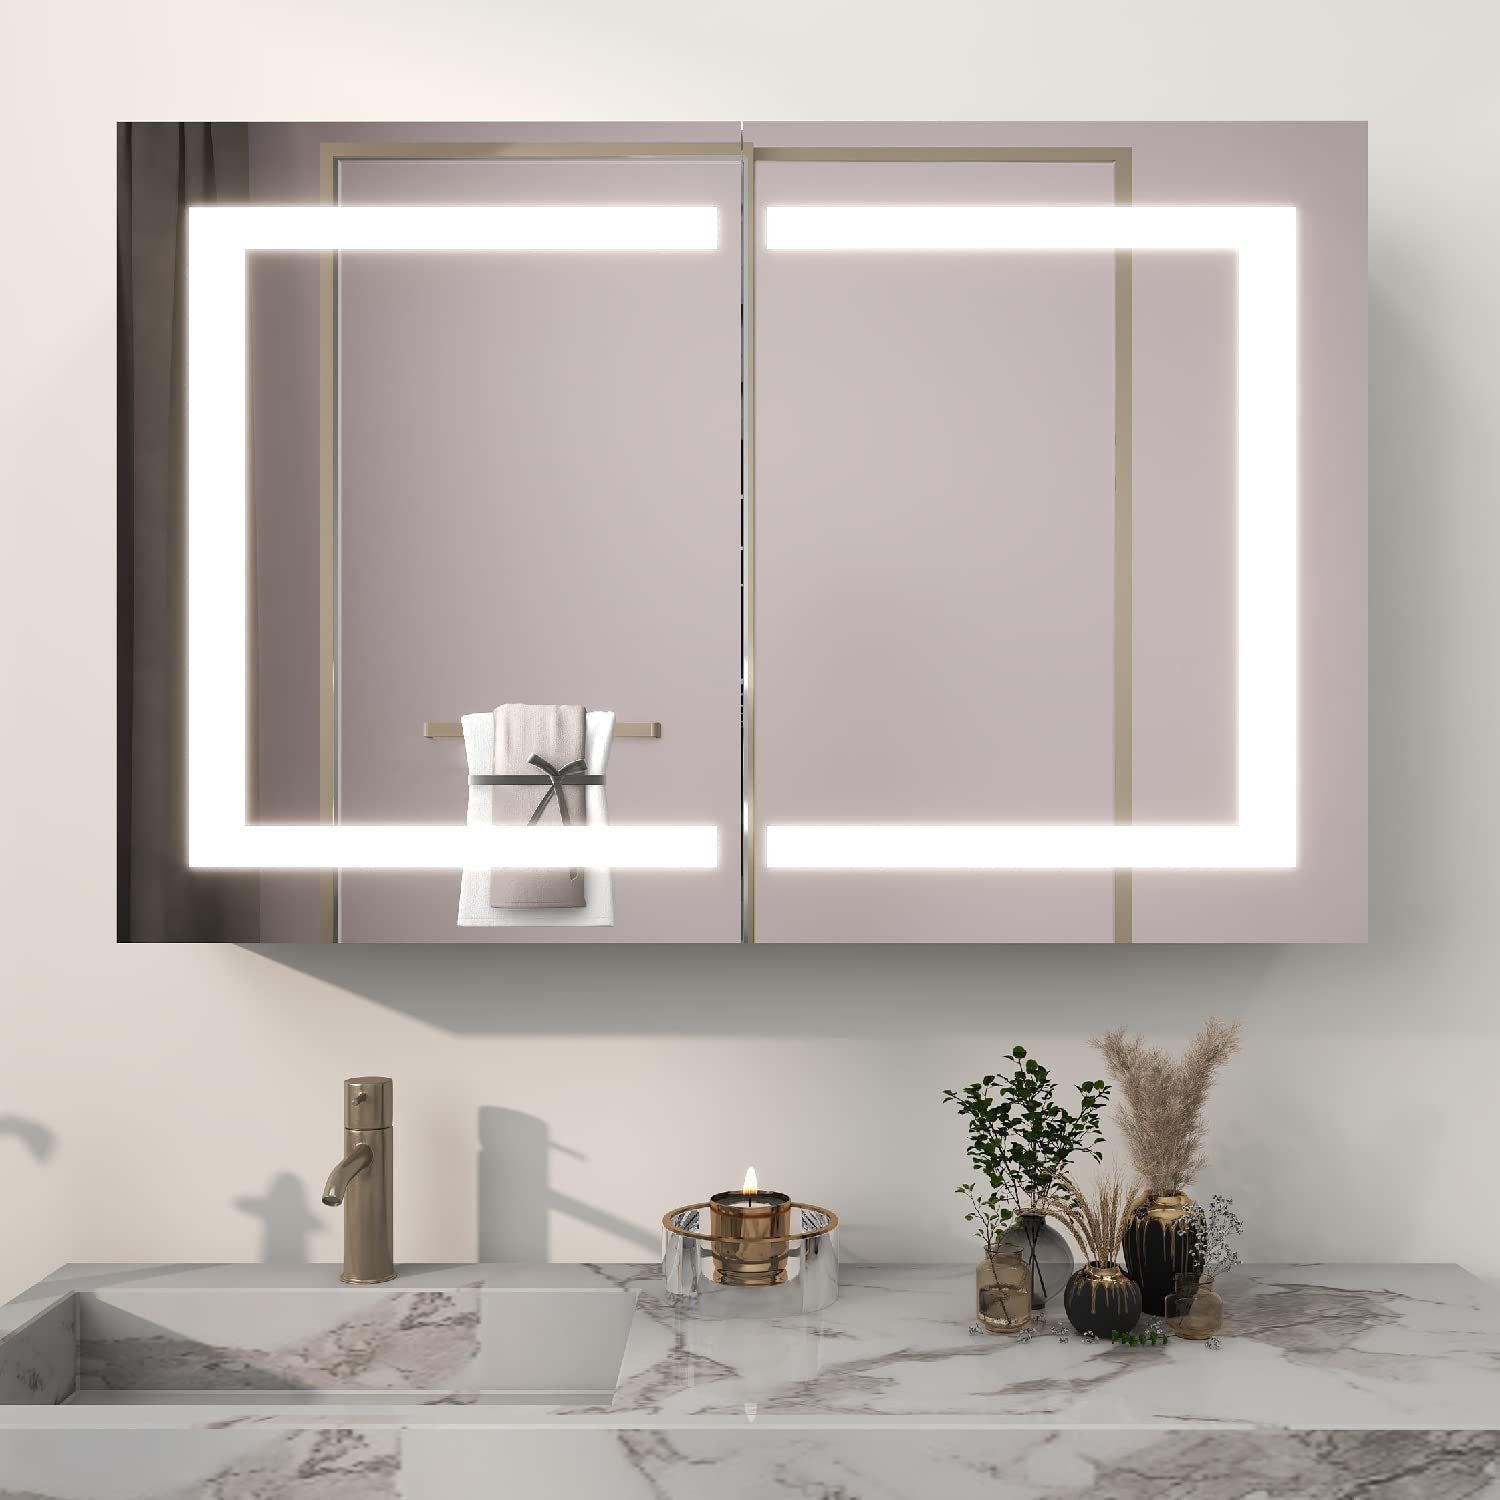 36x24 inch Surface Mount LED Bathroom Medicine Cabinet with Vanity Mirror